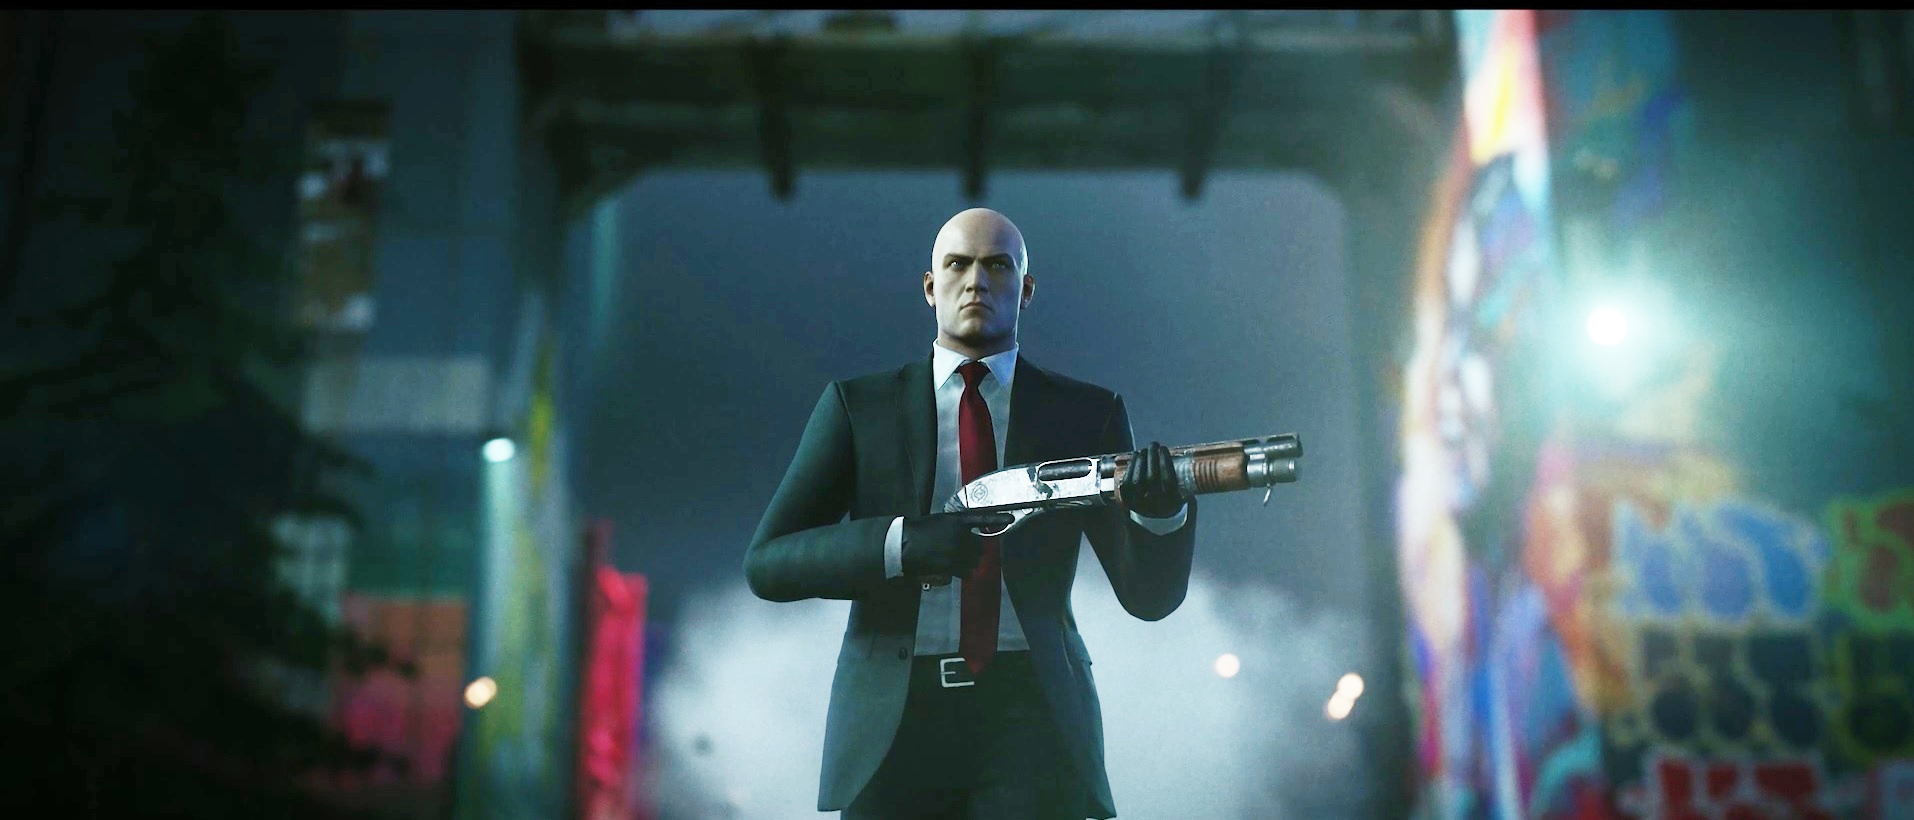 Hitman 3 PC review: Perhaps the VR version will be better